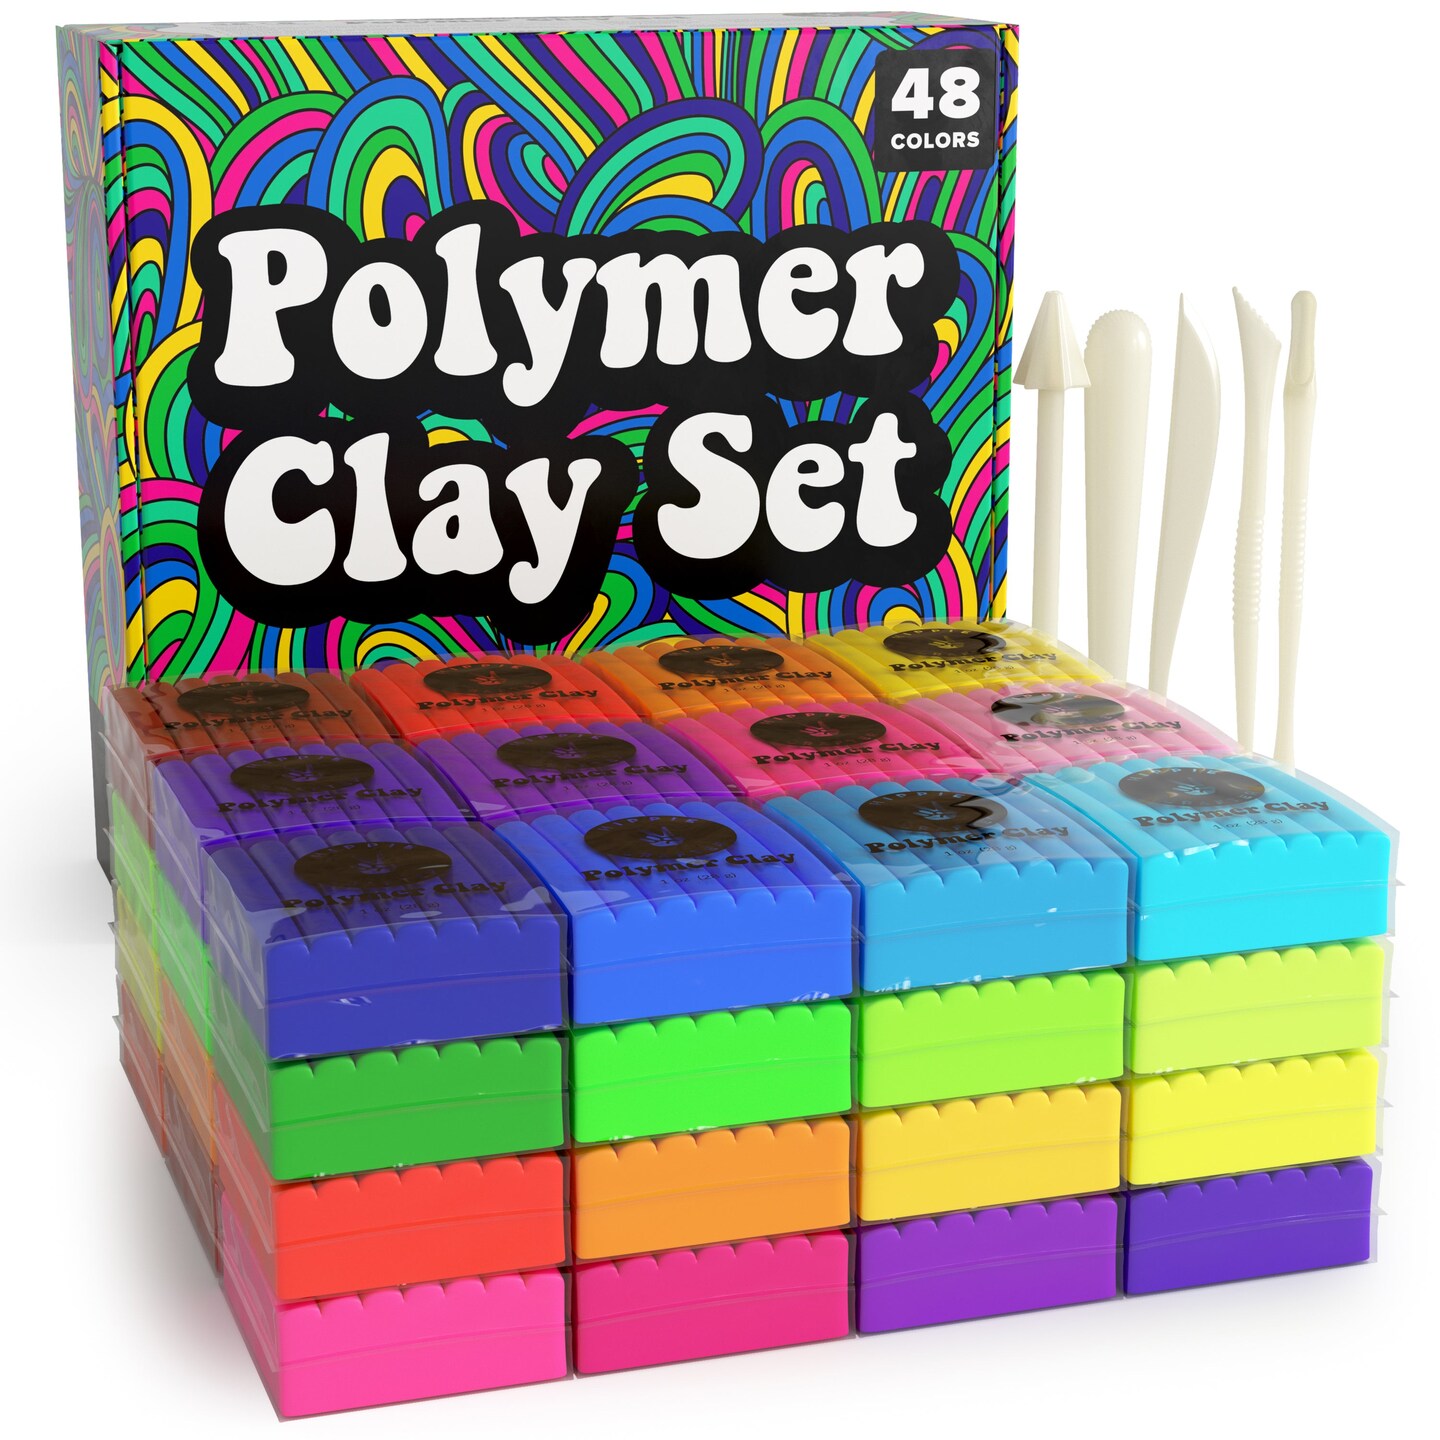 Baking polymer clay: What to bake polymer clay on? 